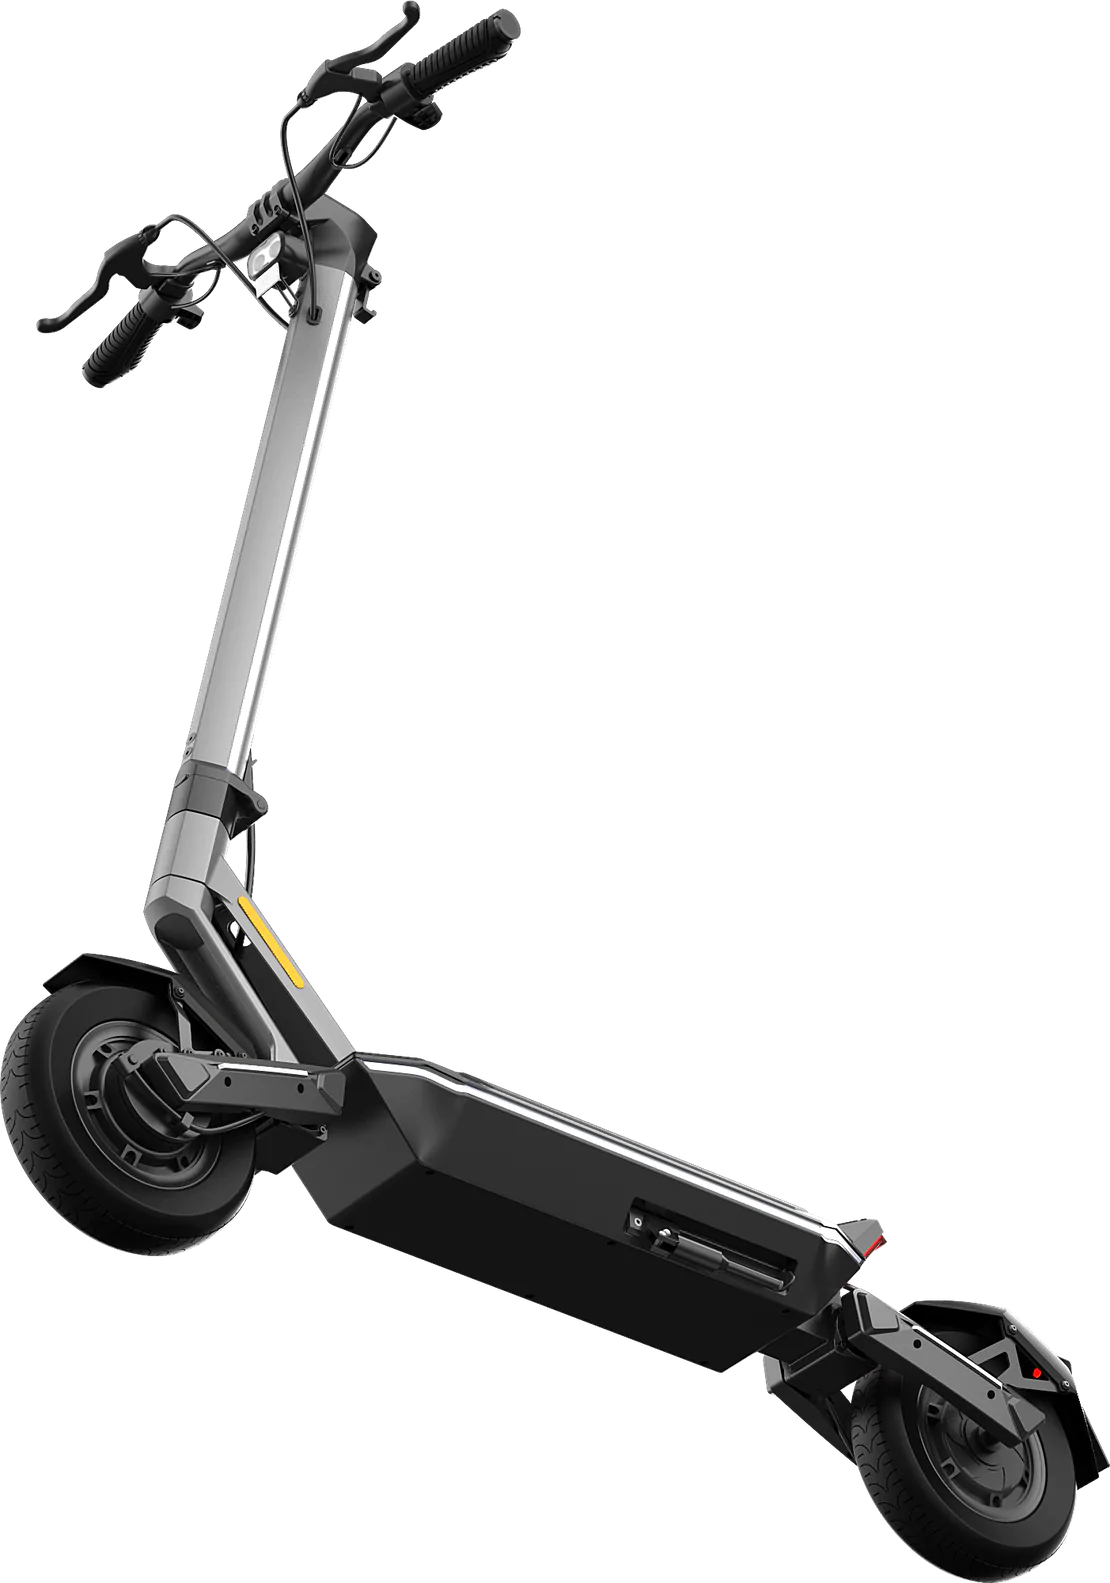 Action shot showing the underside of the Punk rider 600 Pro. Water resistent electric scooter. Available from Freed Electric Scooter Shop, Auckland